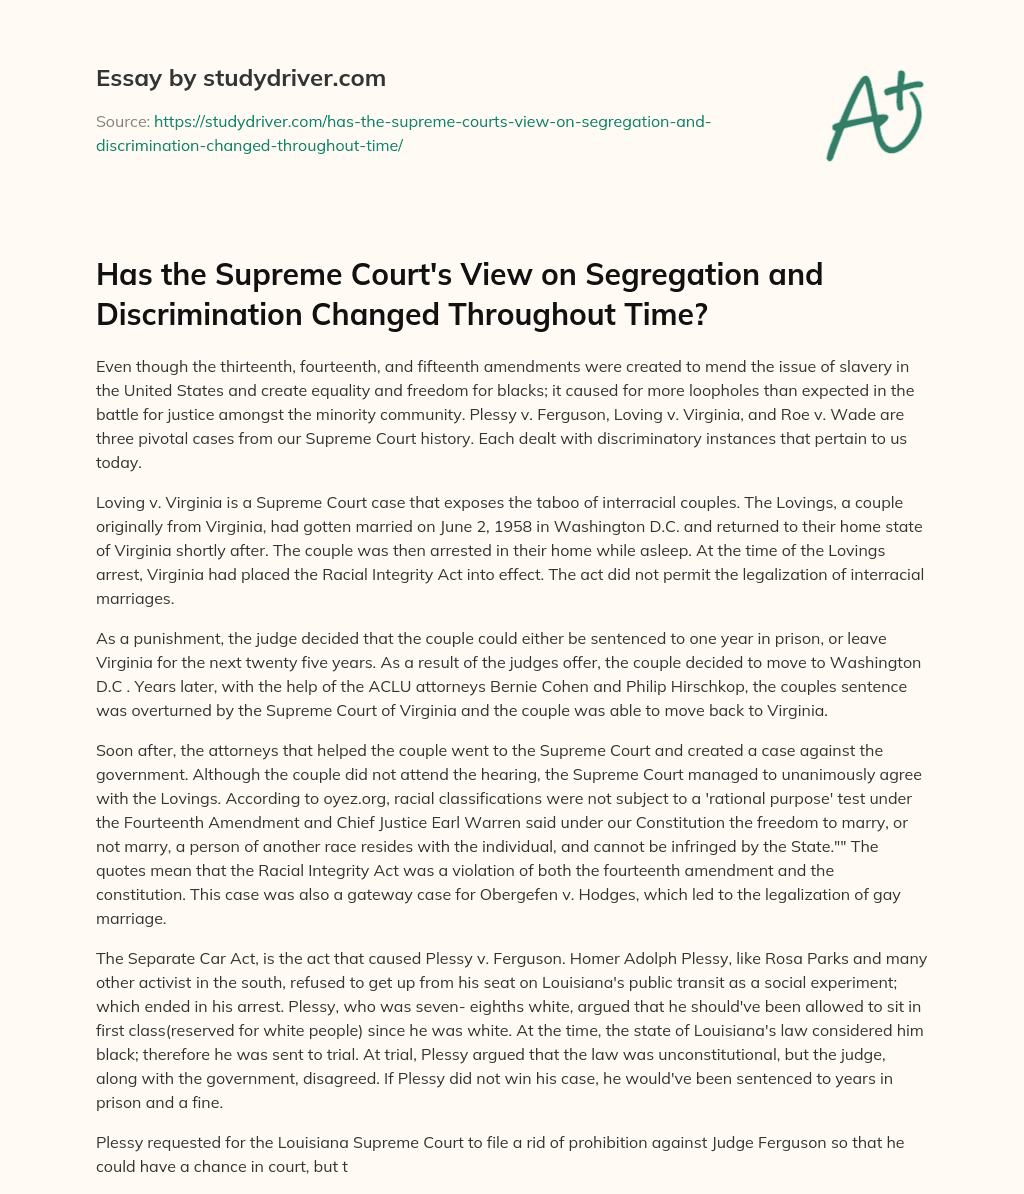 Has the Supreme Court’s View on Segregation and Discrimination Changed Throughout Time? essay